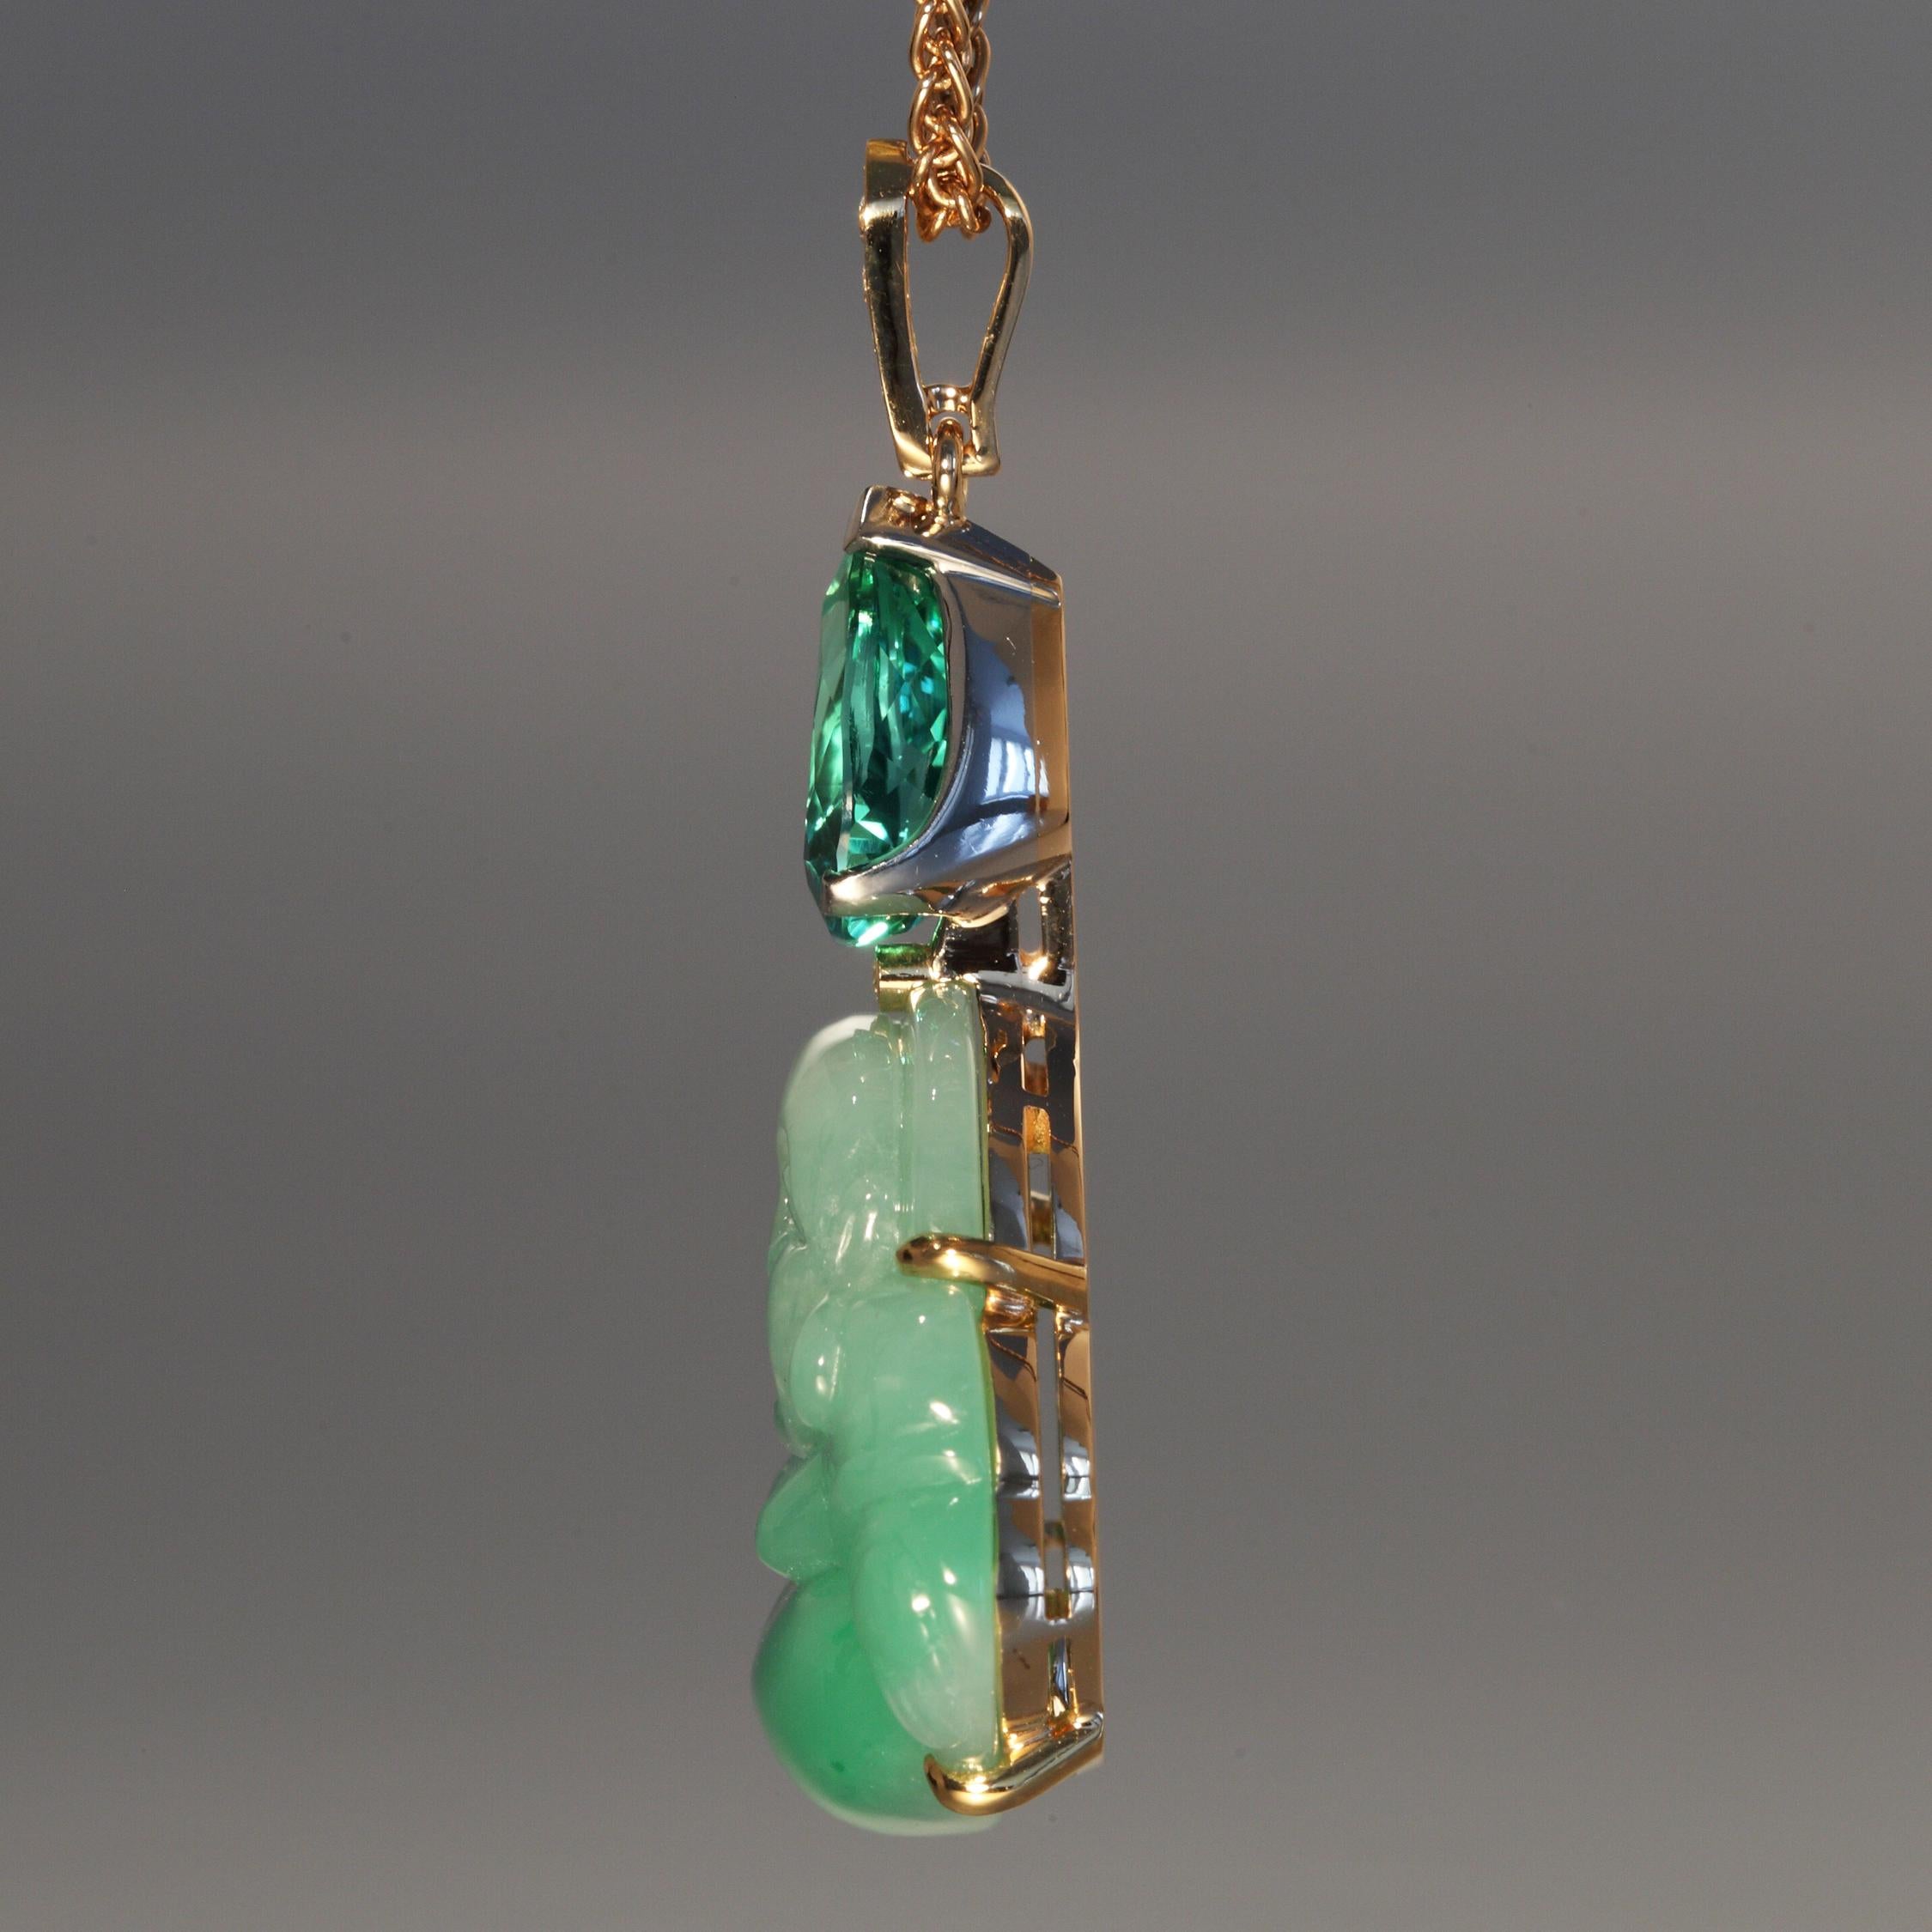 This 42.69 carat green Jade laughing Buddha carving is set with a 4.22 carat green tourmaline drop and 0.04 carats diamonds F,G vvs in rose gold and platinum pendant on a rose gold braid chain. The tourmaline is accompanied by a GRS Report. The